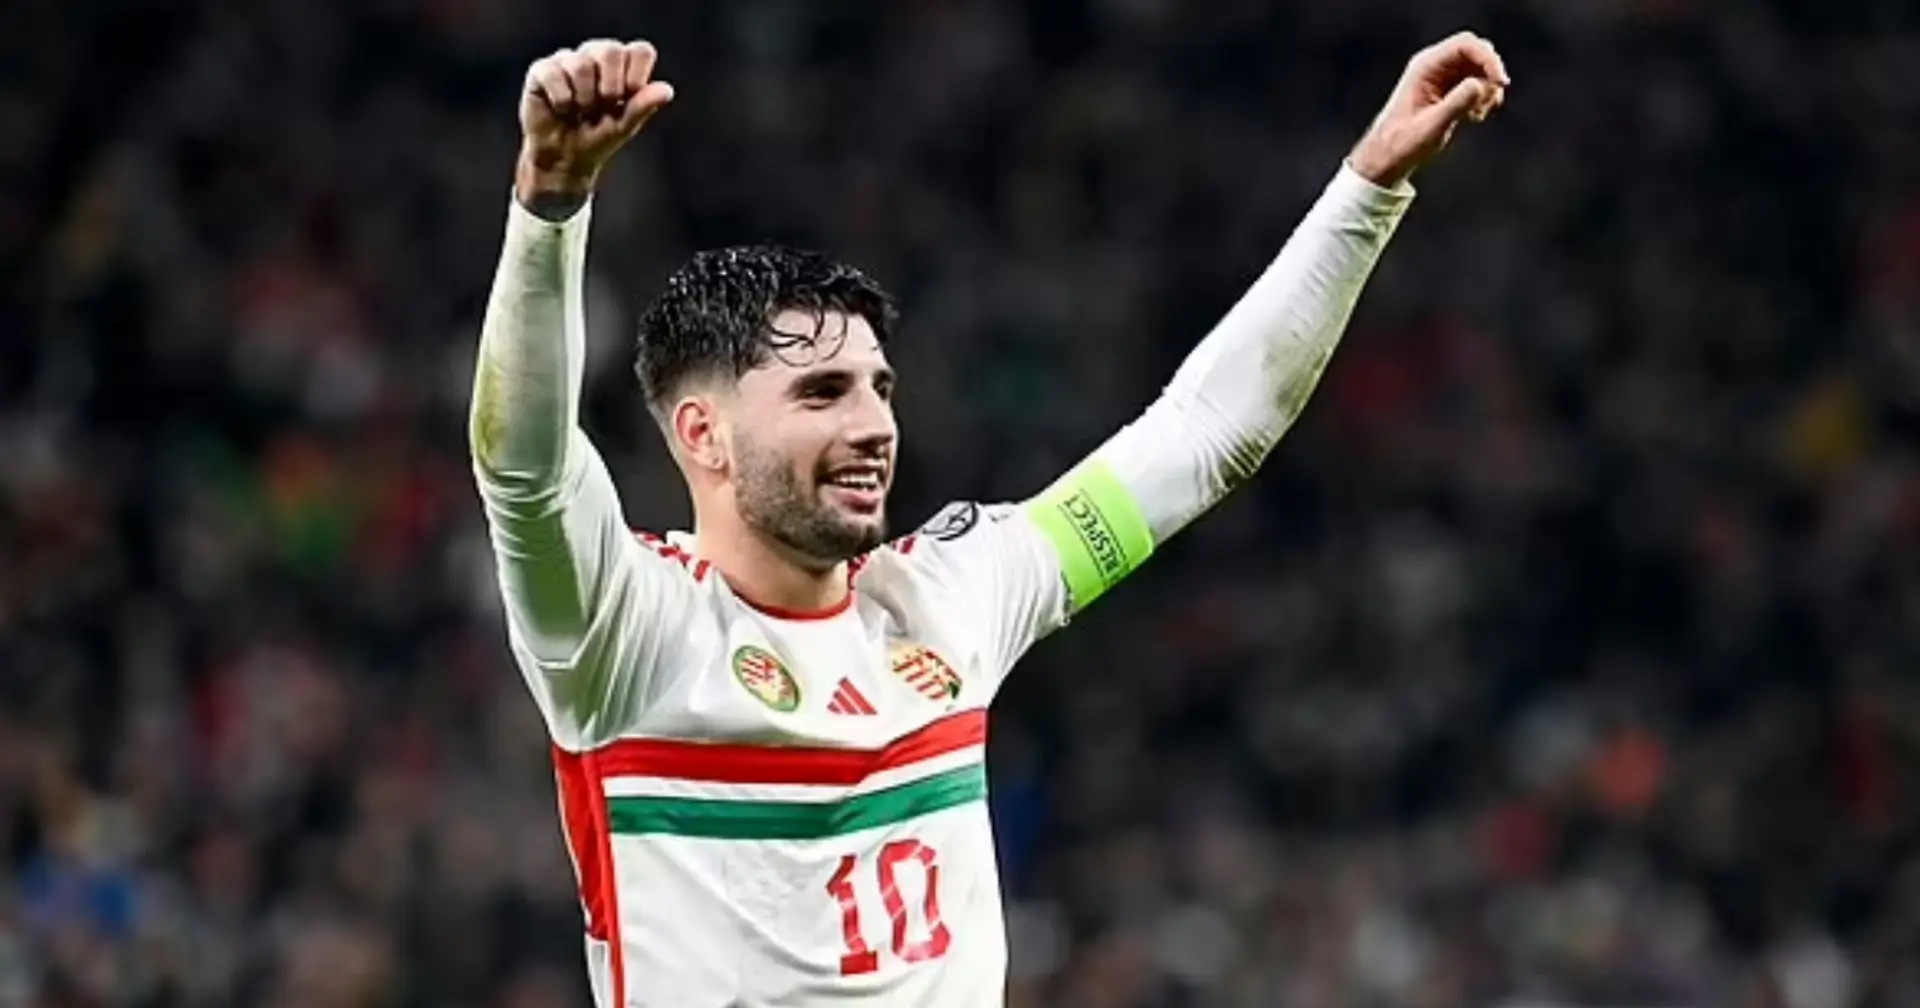 'Literally doesn't have a weak foot: Liverpool fans react to Dominik Szoboszlai's brace for Hungary